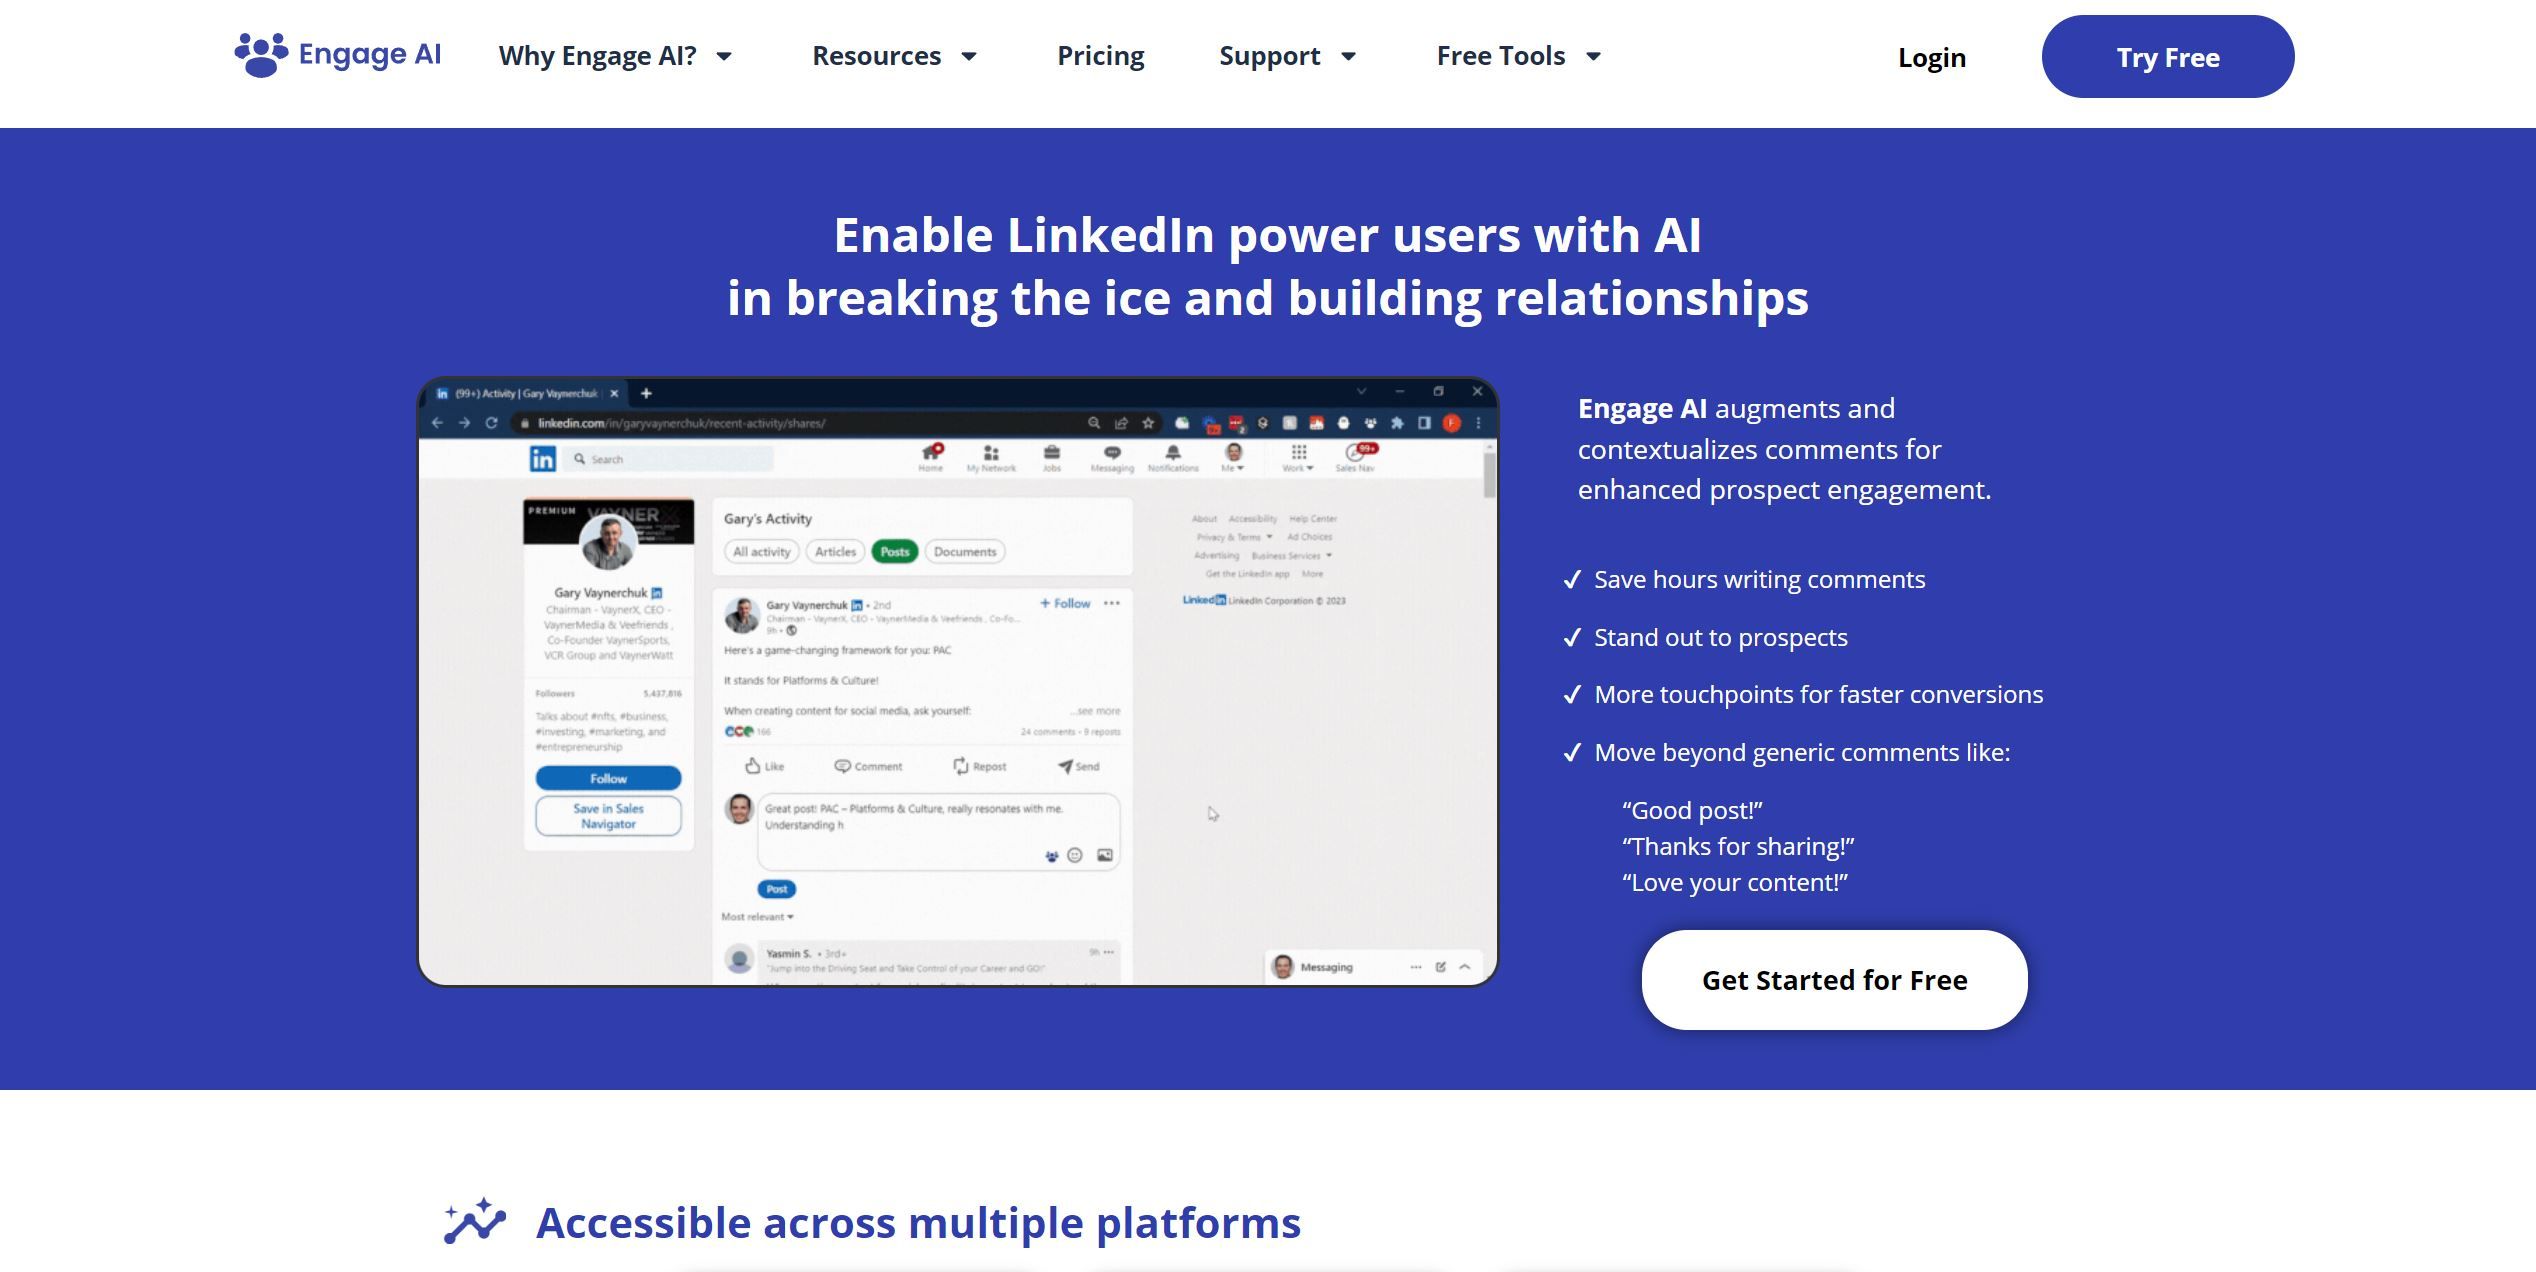 EngageEngage AI tool boosts LinkedIn prospect engagement through contextualized comments